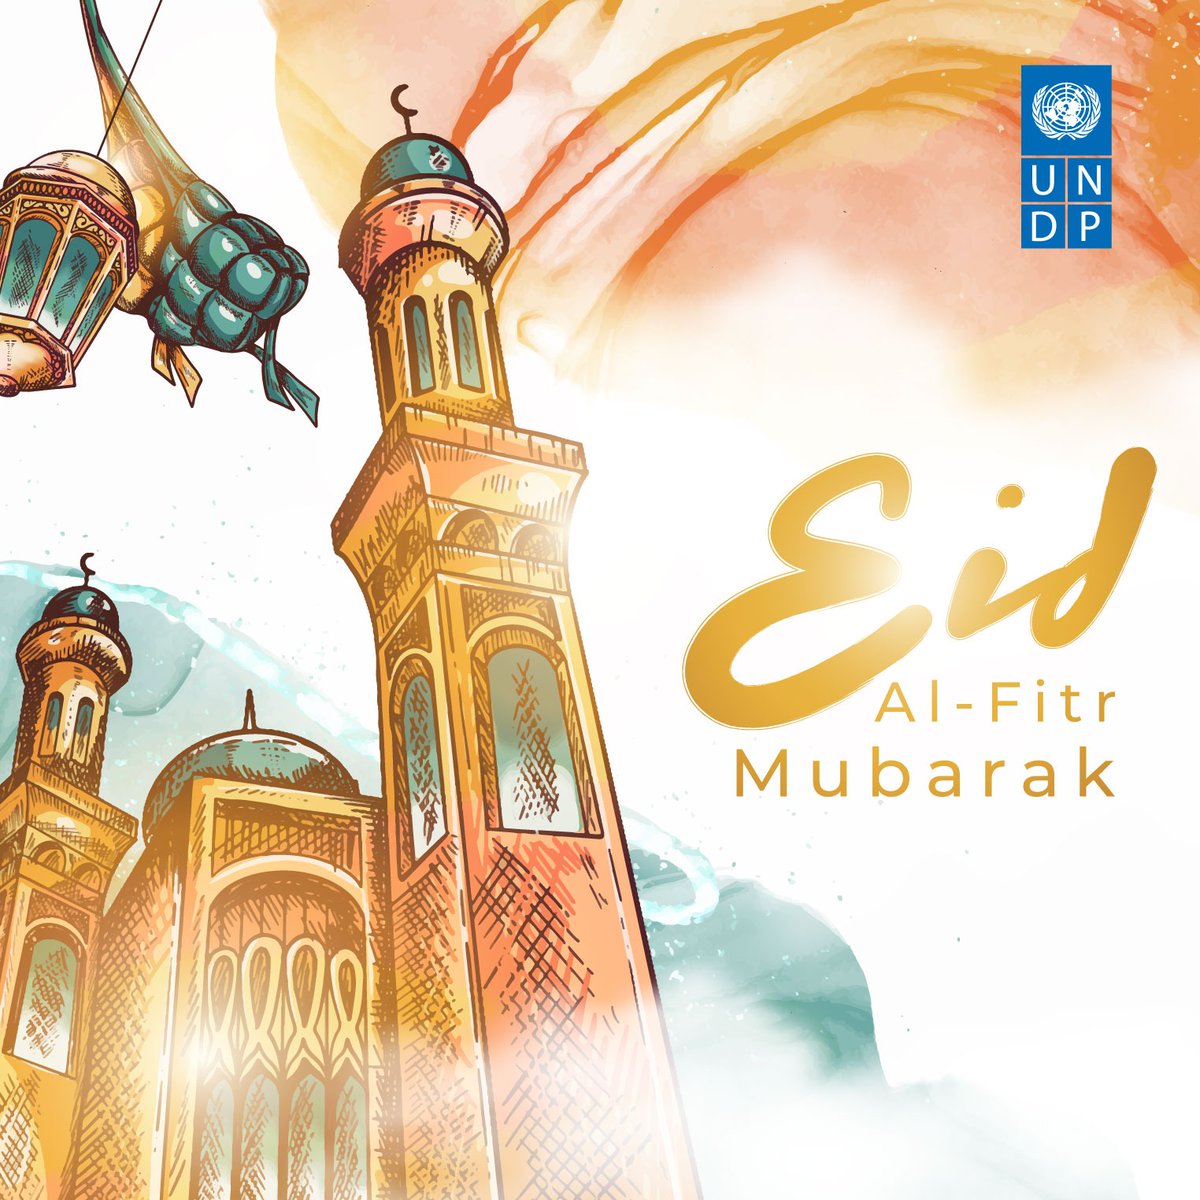 From all of us at UNDP Afghanistan, warmest wishes for a wonderful Eid al-Fitr. May your celebrations be joyous and memorable. Eid mubarak! عید مبارک! اختر مو مبارک!